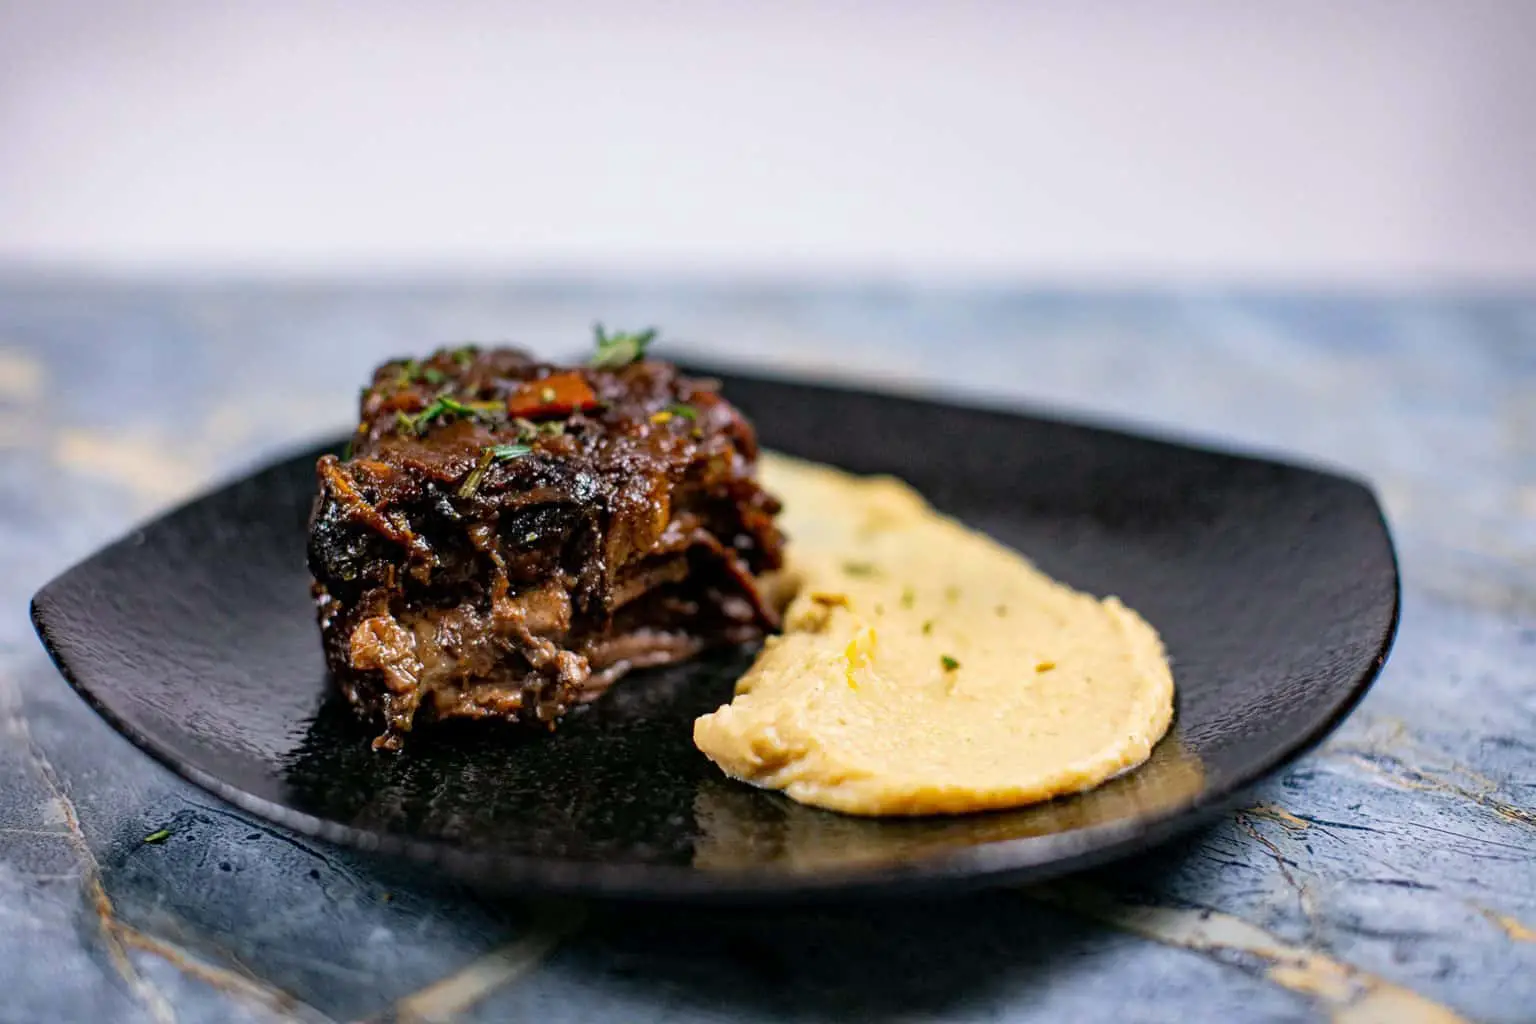 Garlic mashed parsnips with meat garnished with herbs served on a black plate placed on a blue surface